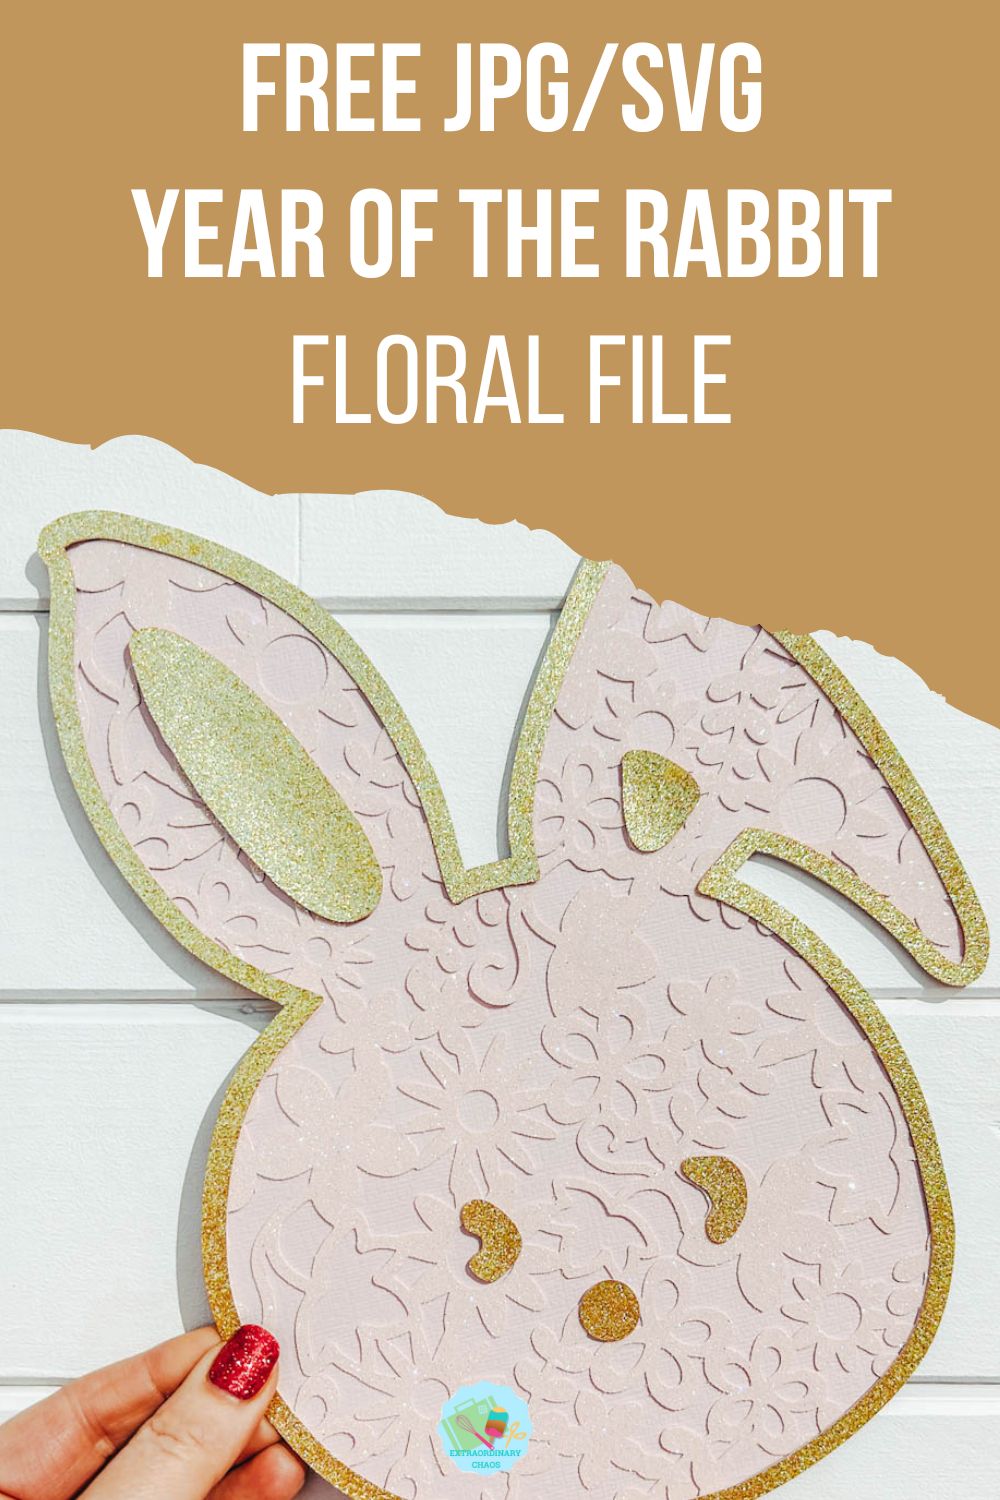 Free JPG SVG Year Of The Rabbit Floral File